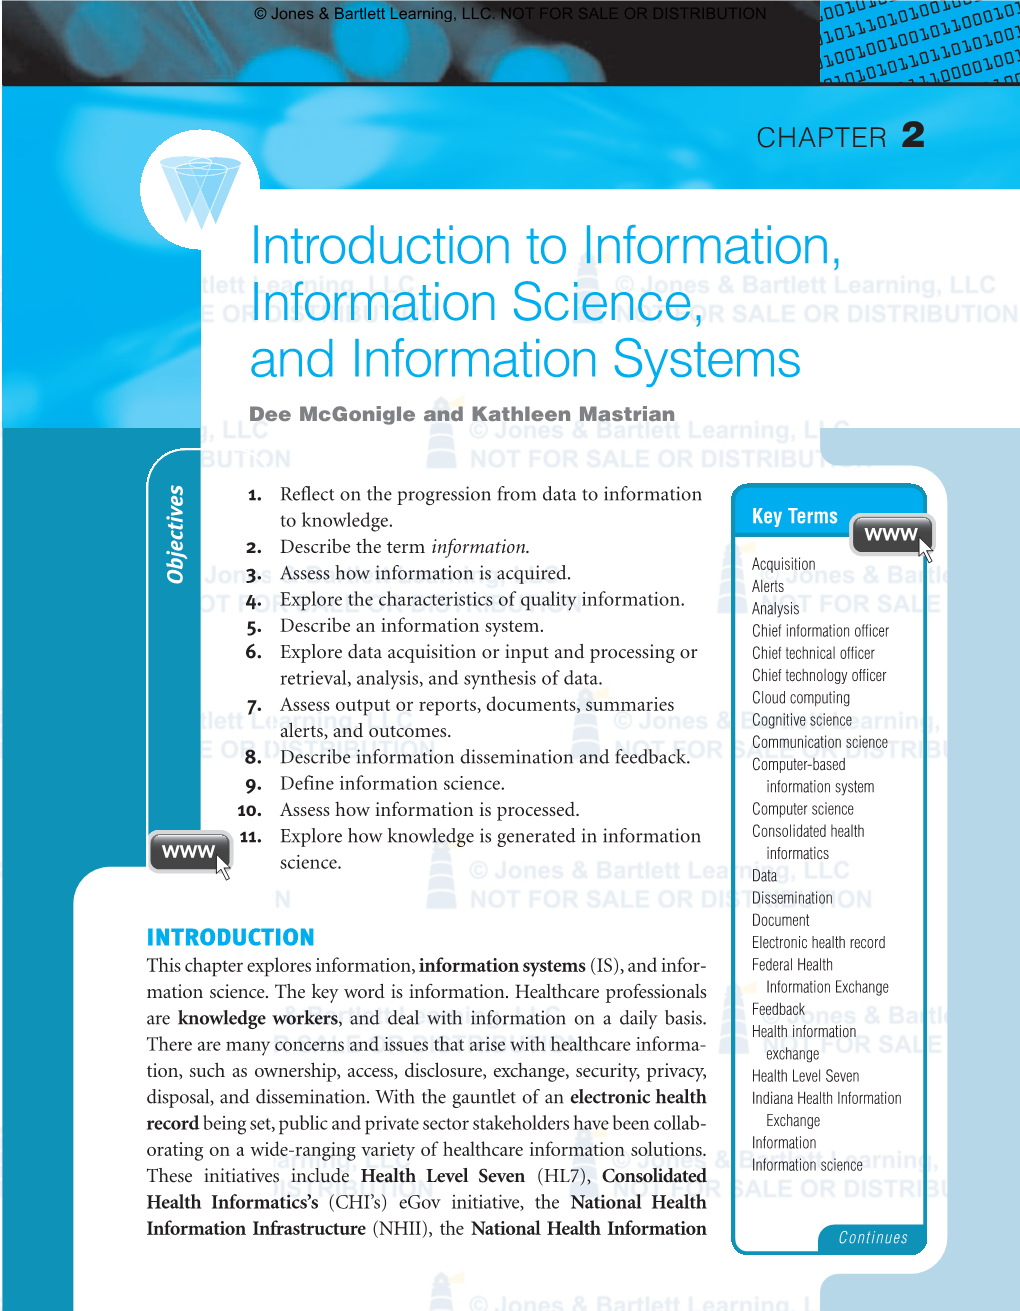 Introduction to Information, Information Science, and Information Systems Dee Mcgonigle and Kathleen Mastrian